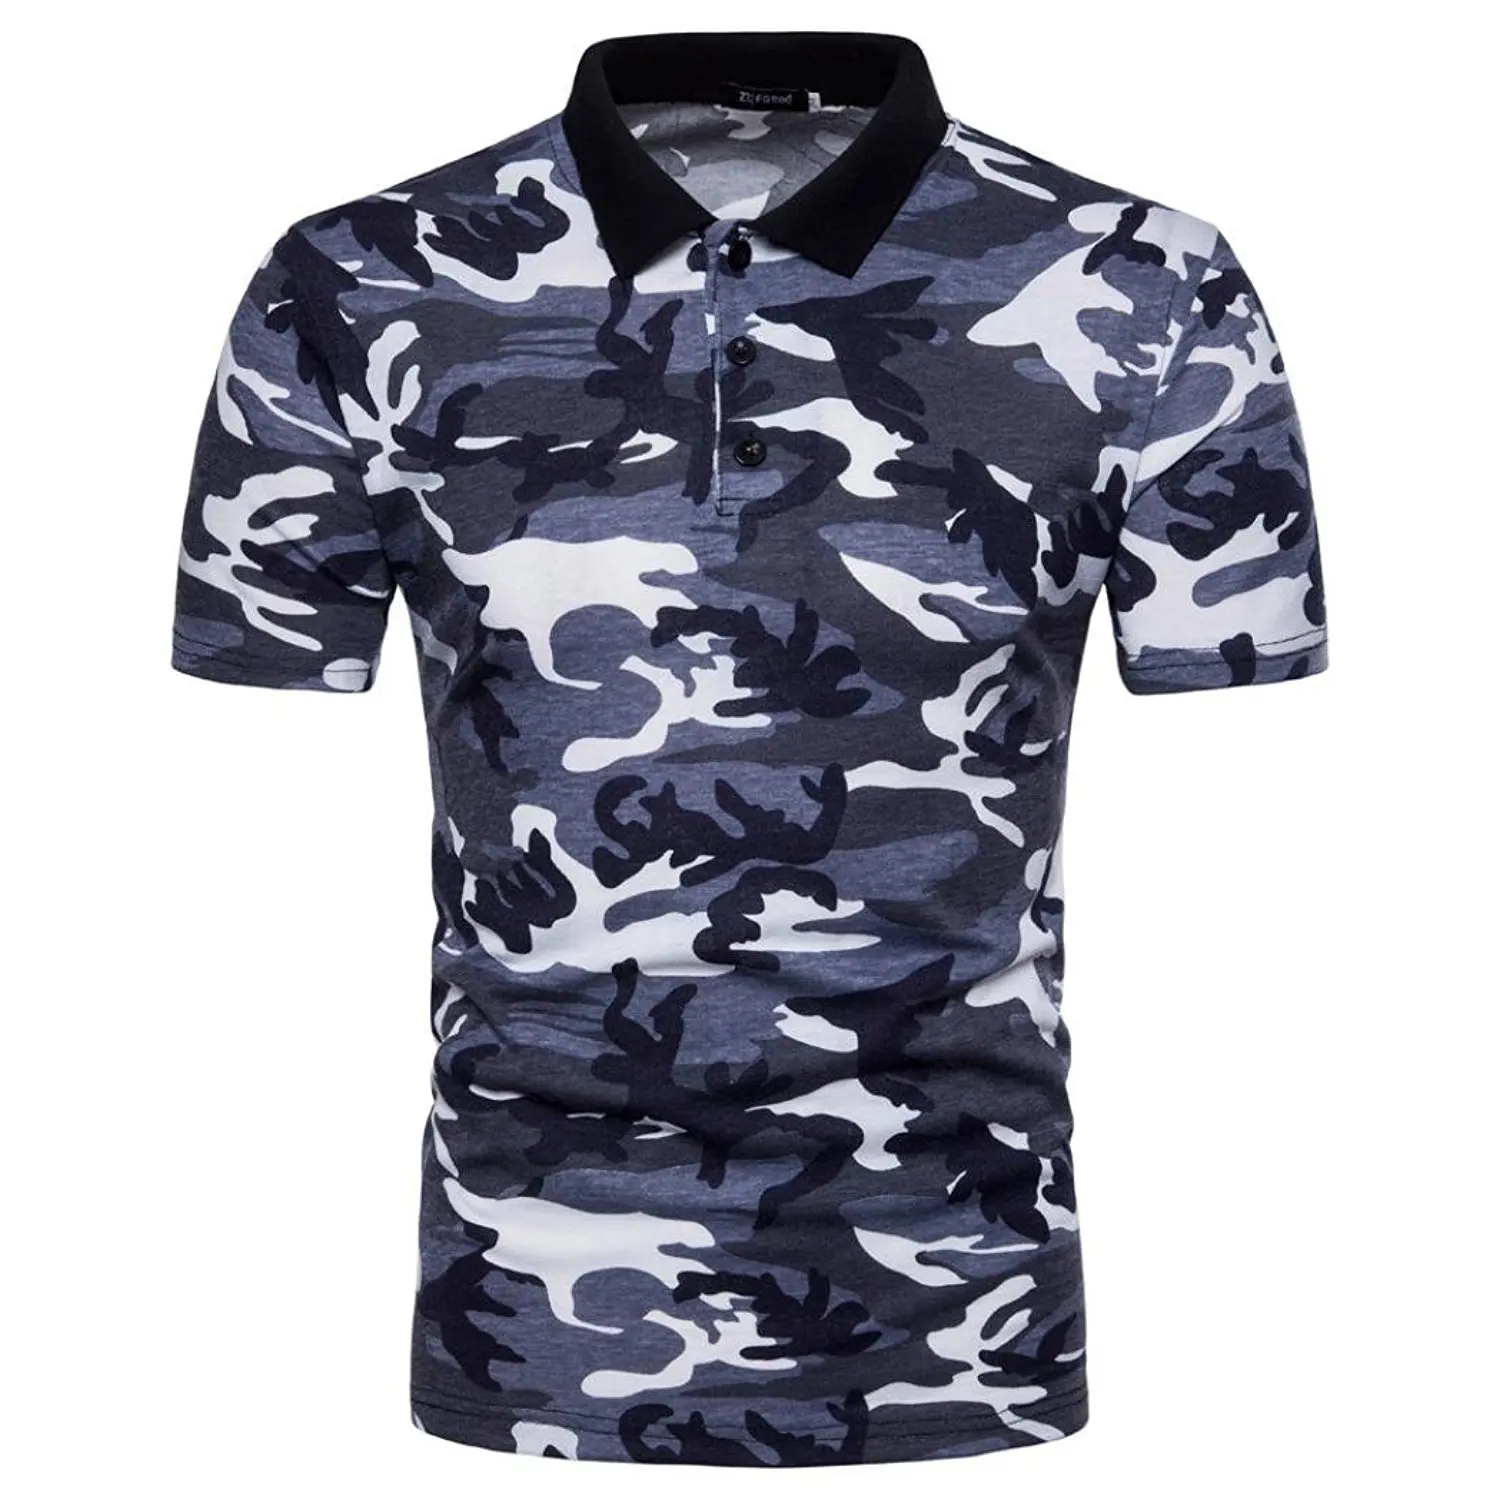 Cheap Polo Shirt Camouflage, find Polo Shirt Camouflage deals on line